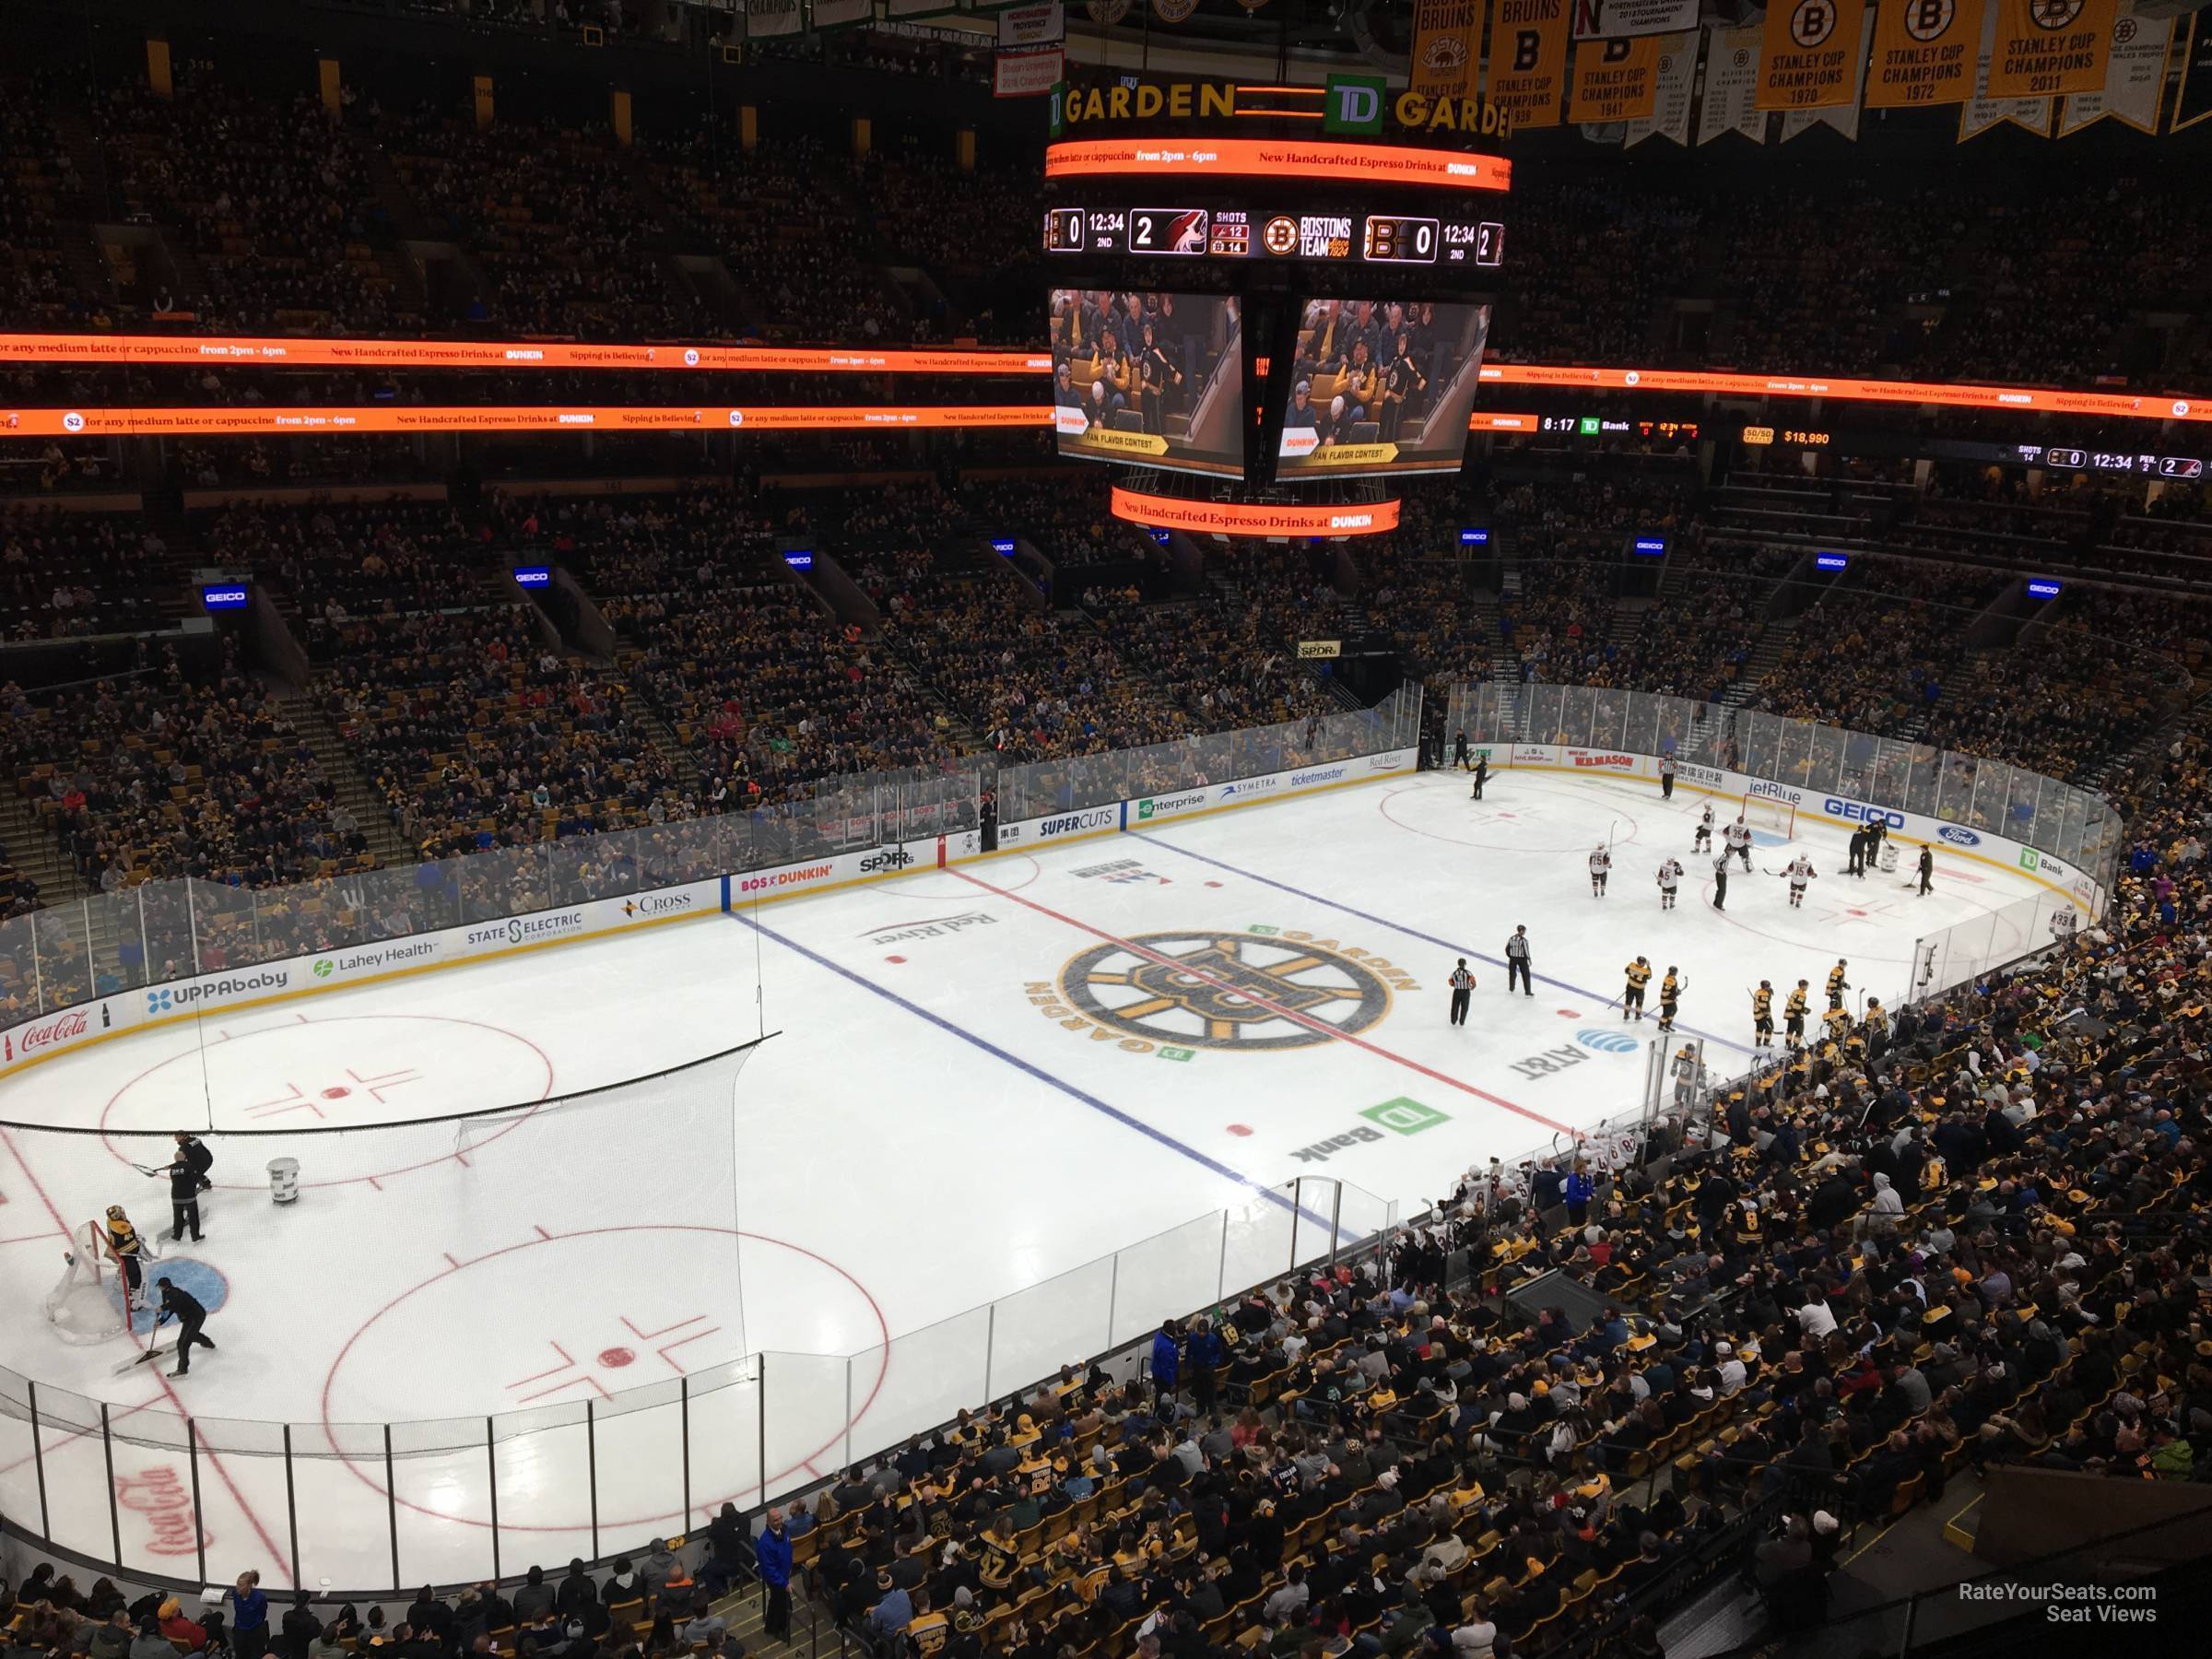 section 304, row 3 seat view  for hockey - td garden